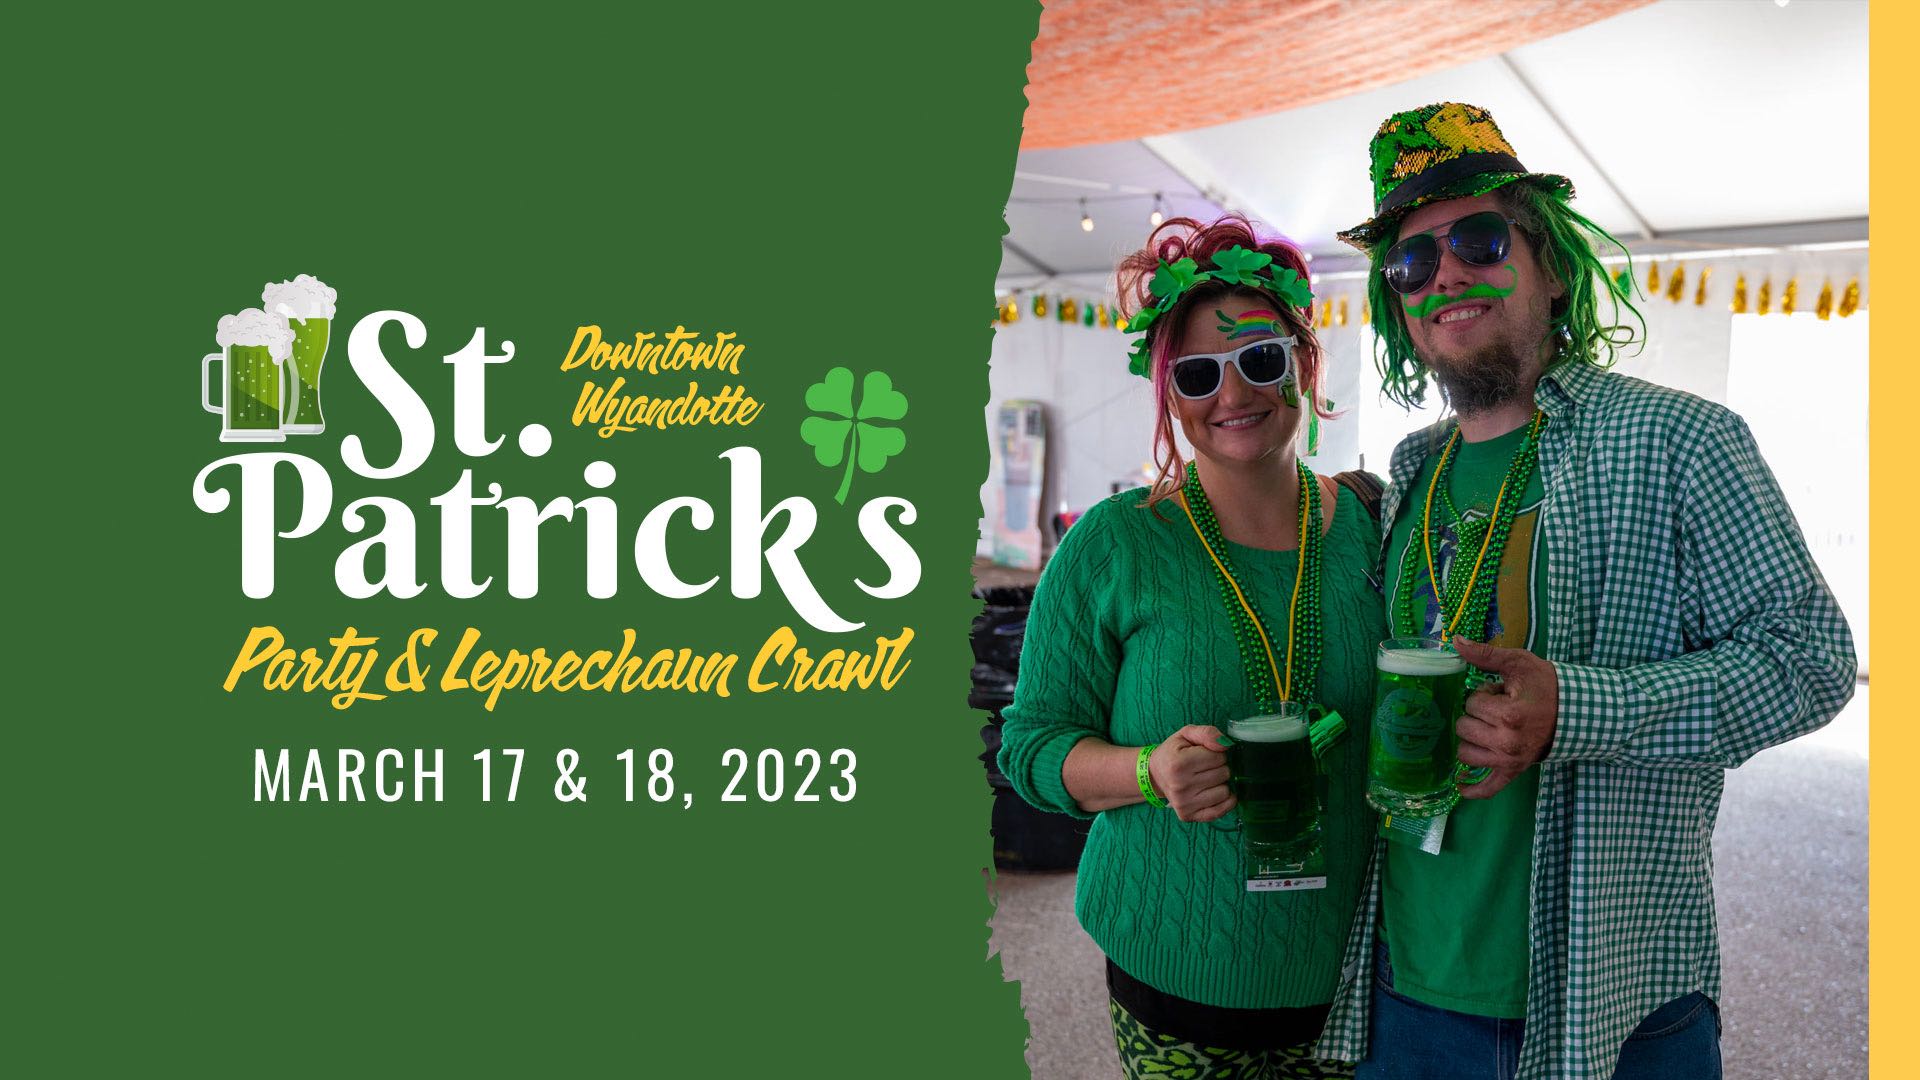 St. Patrick's Party & Leprechaun Crawl in Downtown Wyandotte on March 17 & 18, 2023